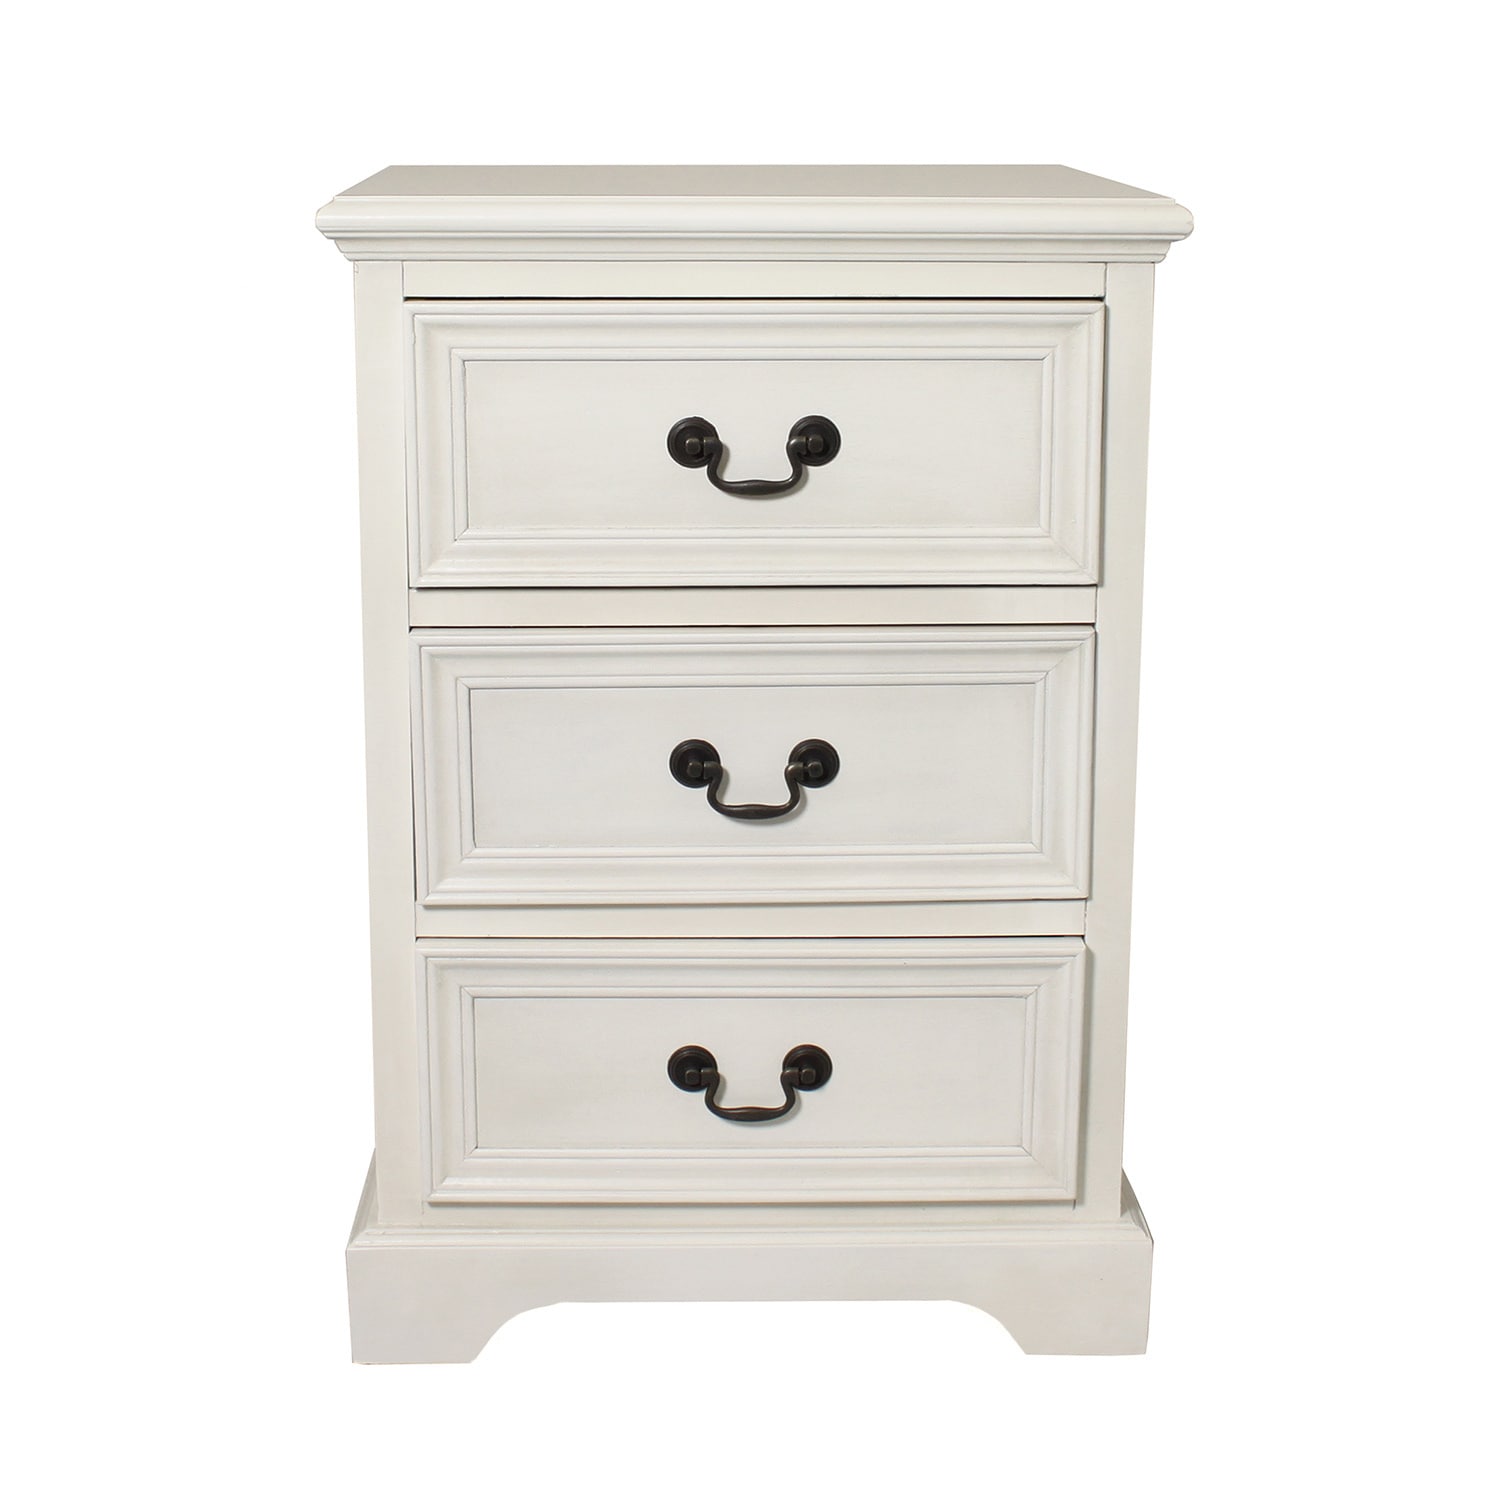 Casa Cortes Casa Cortes Hand painted 3 drawer Antique White Solid Wood Night Stand Beige Size 3 drawer